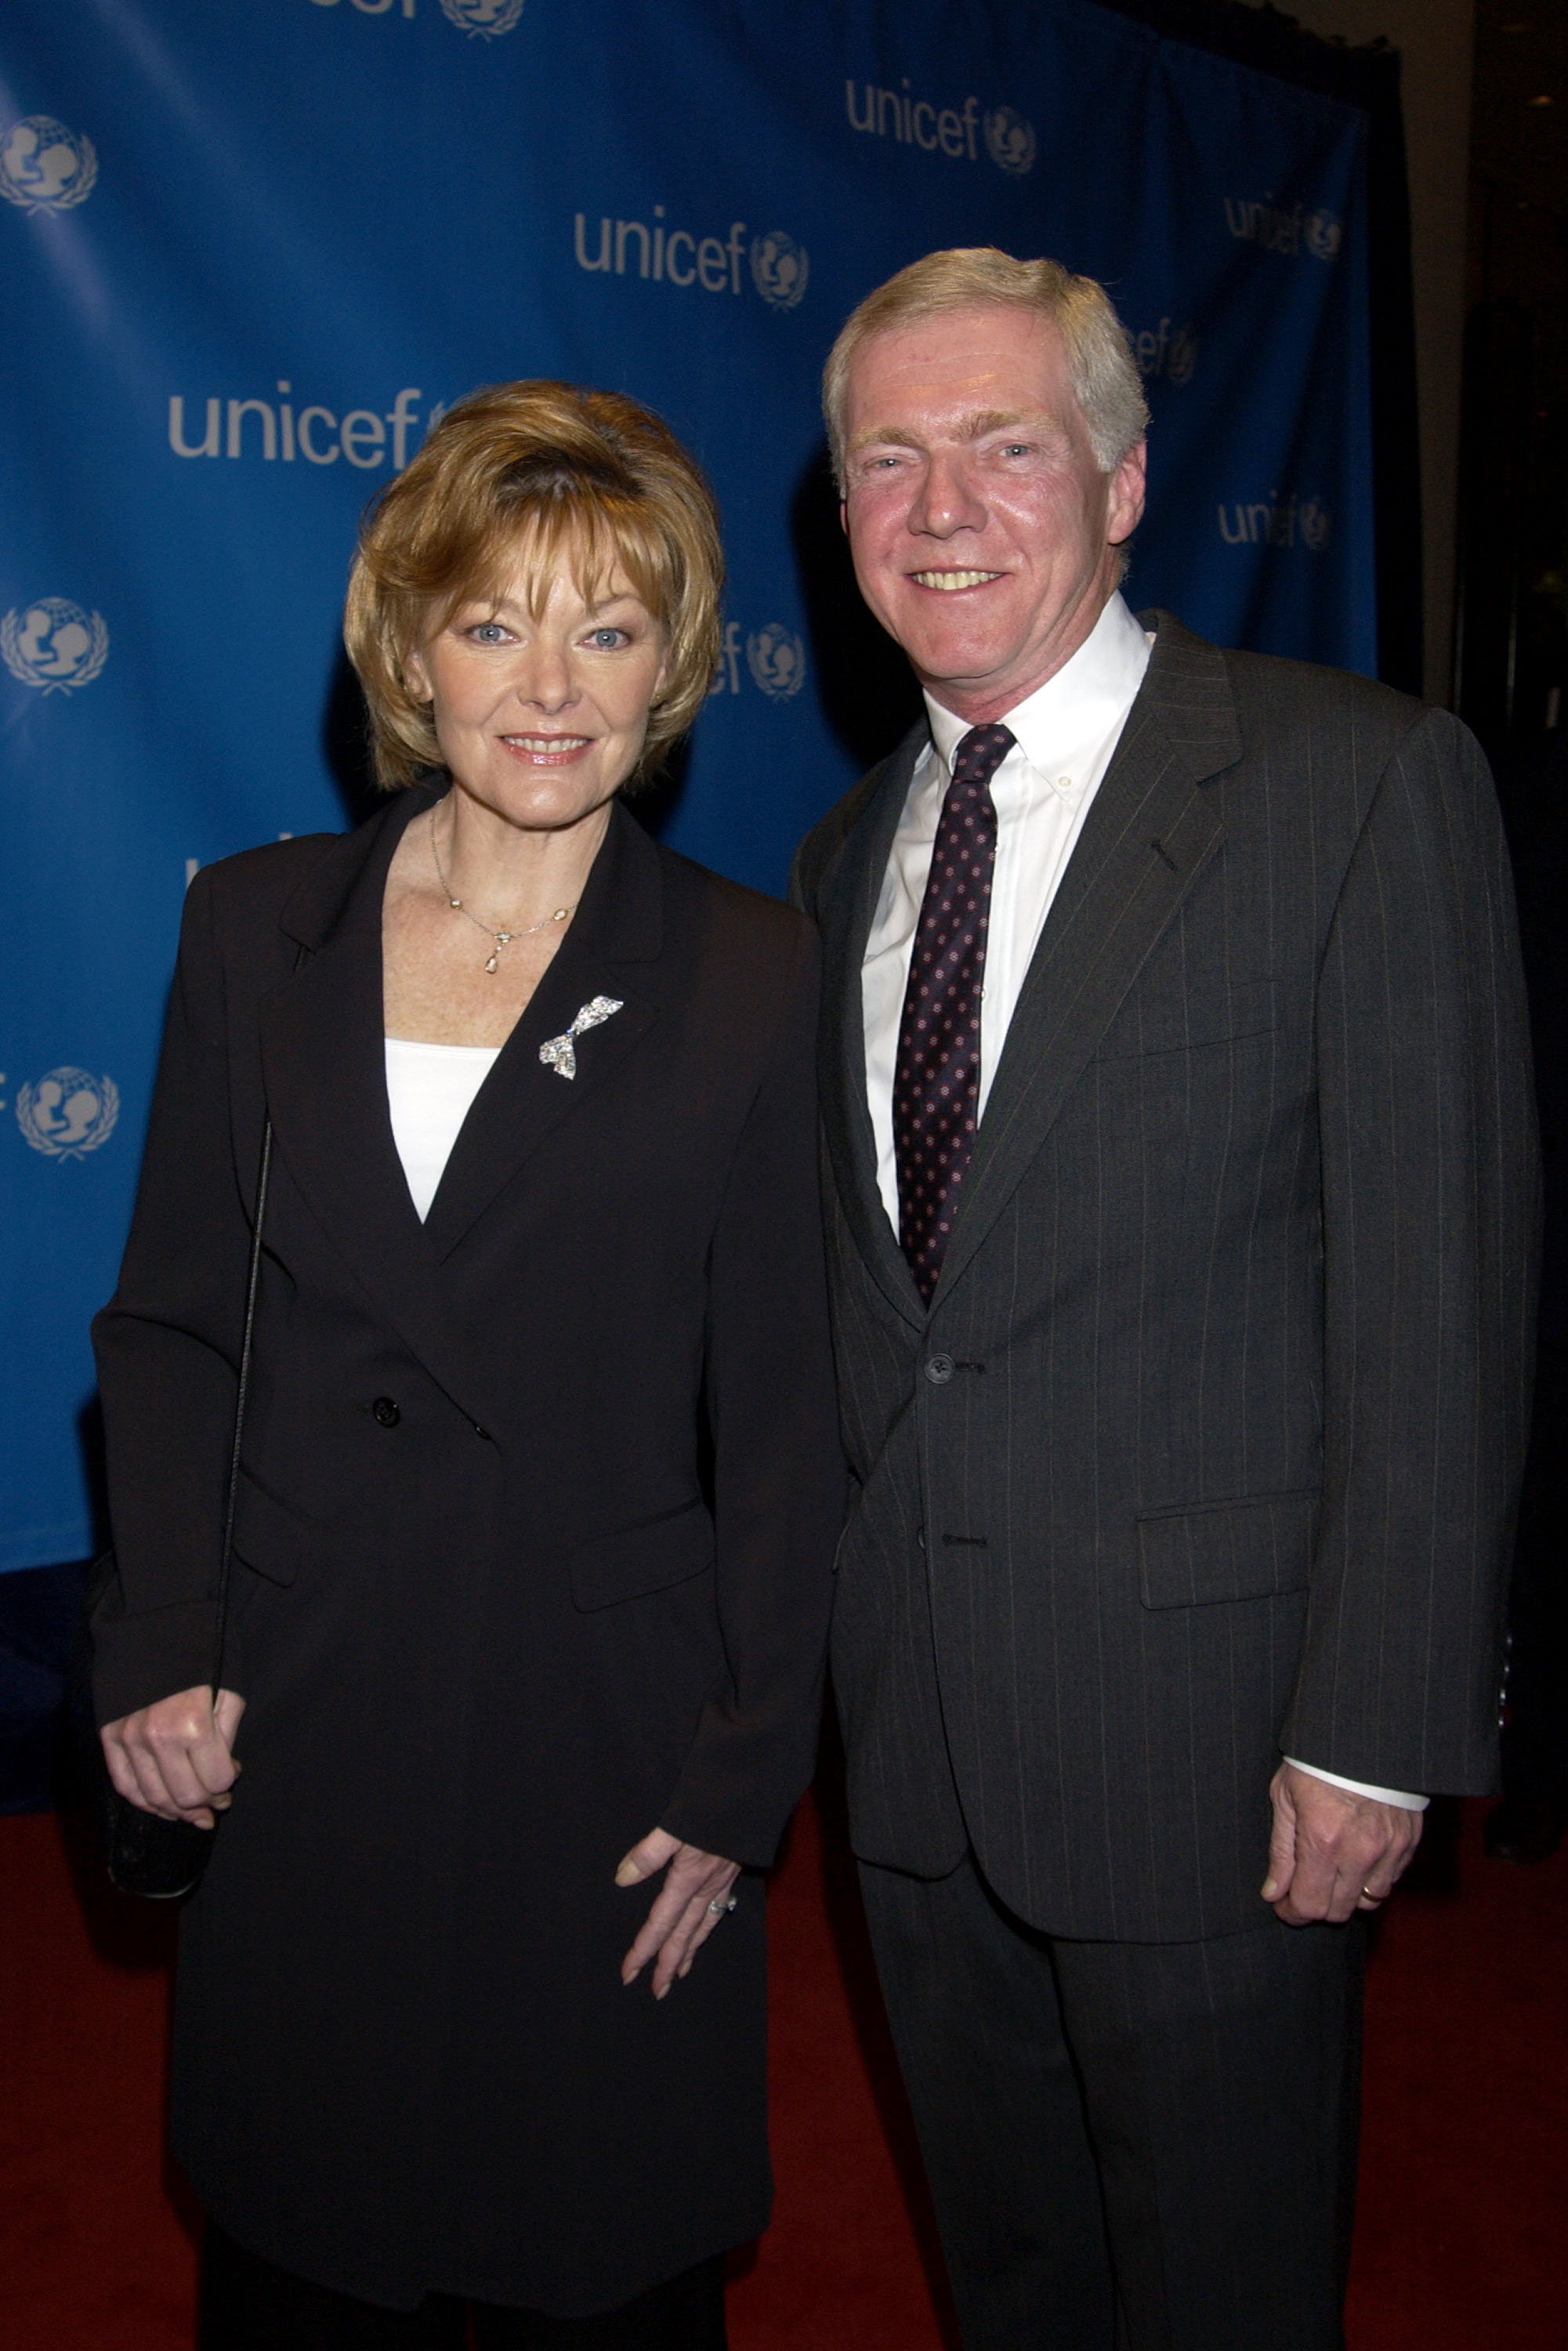 Jane Curtin and husband Patrick Lynch during UNICEF Goodwill Gala Celebrating 50 Years of Celebrity Goodwill Ambassadors - Red Carpet at The Beverly Hilton in Beverly Hills, California, | Photo: GettyImages